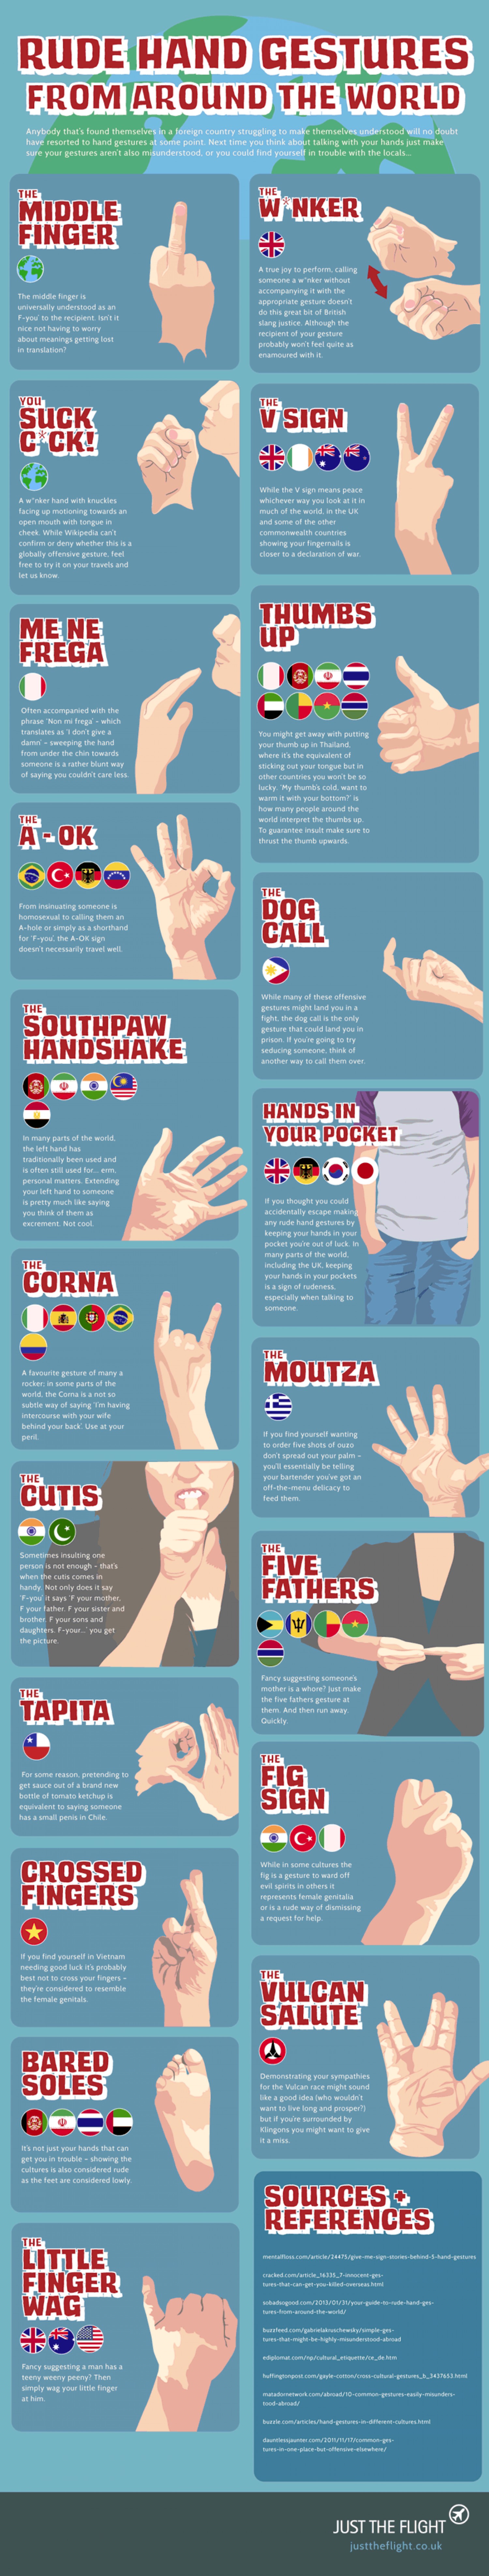 Rude Hand Gestures from Around the World